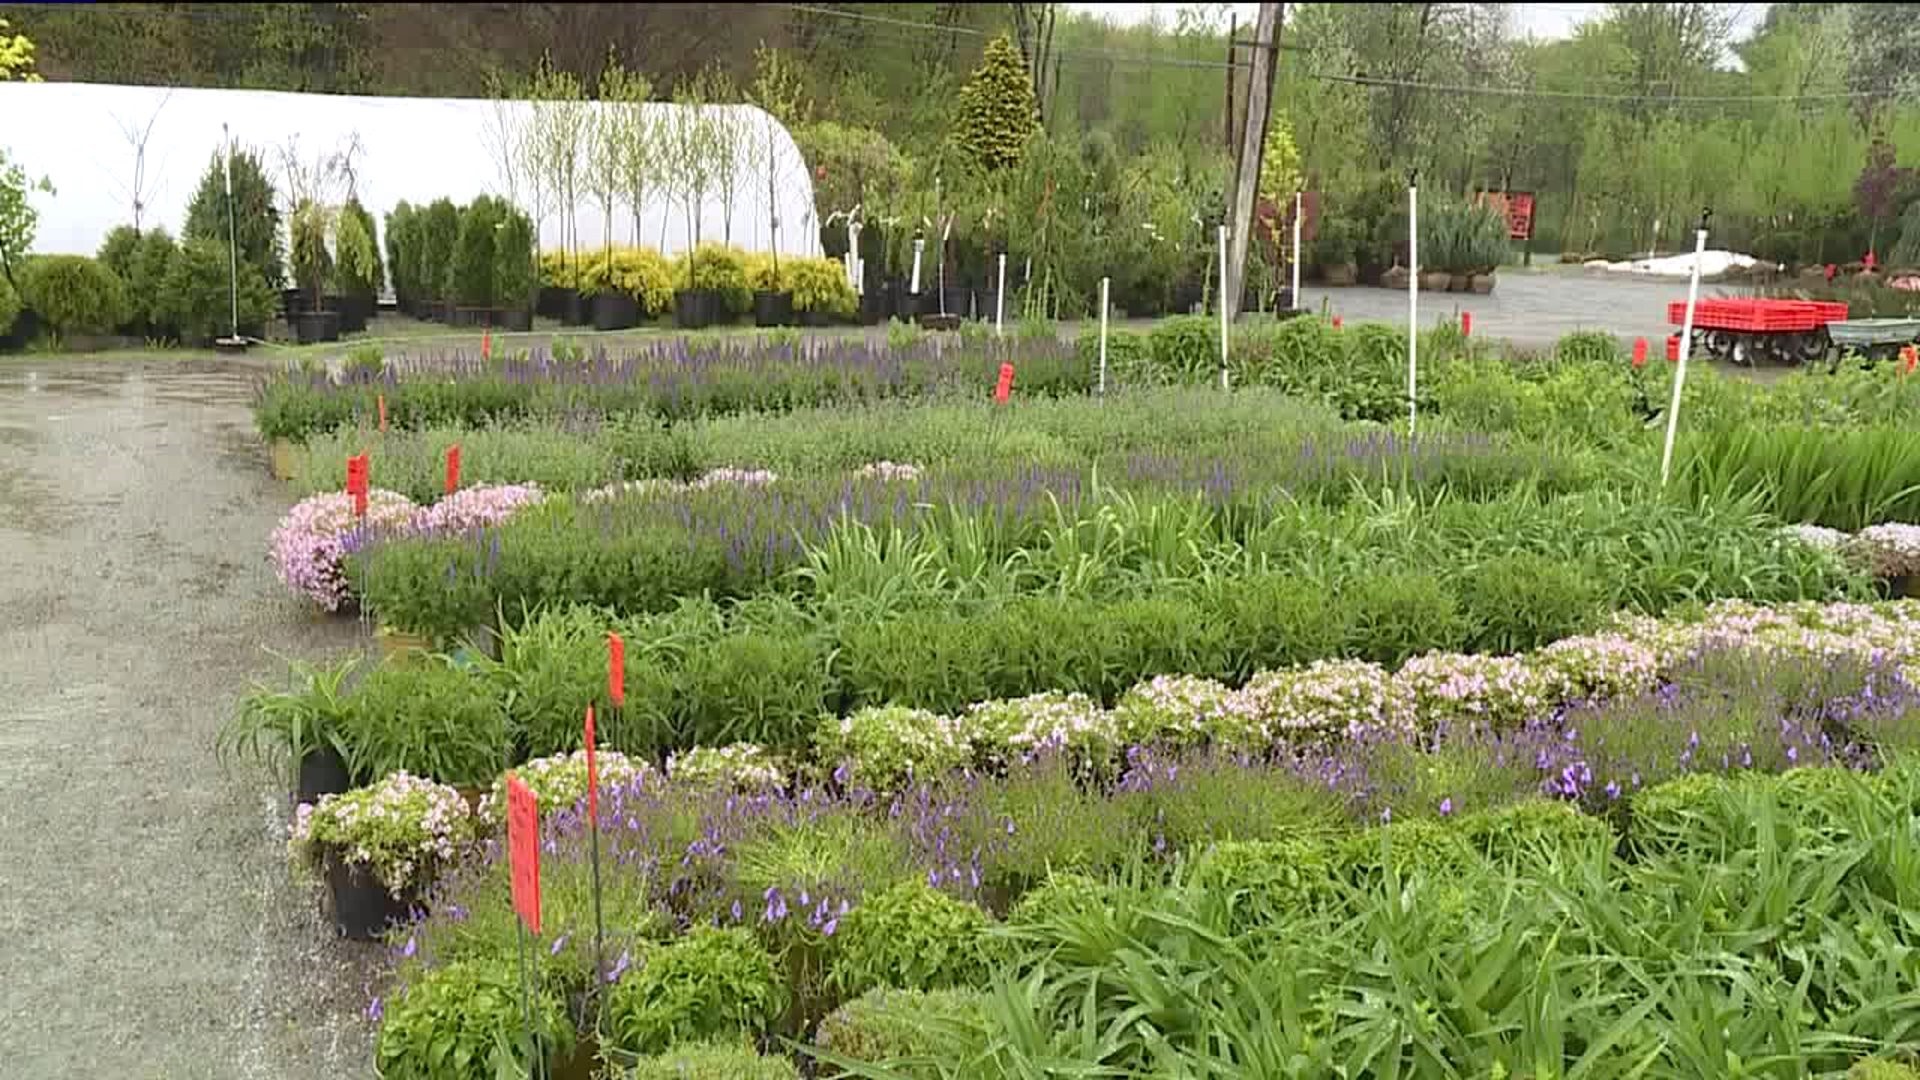 Rain Blamed for Slow Mother's Day at Plant Nursery in Luzerne County